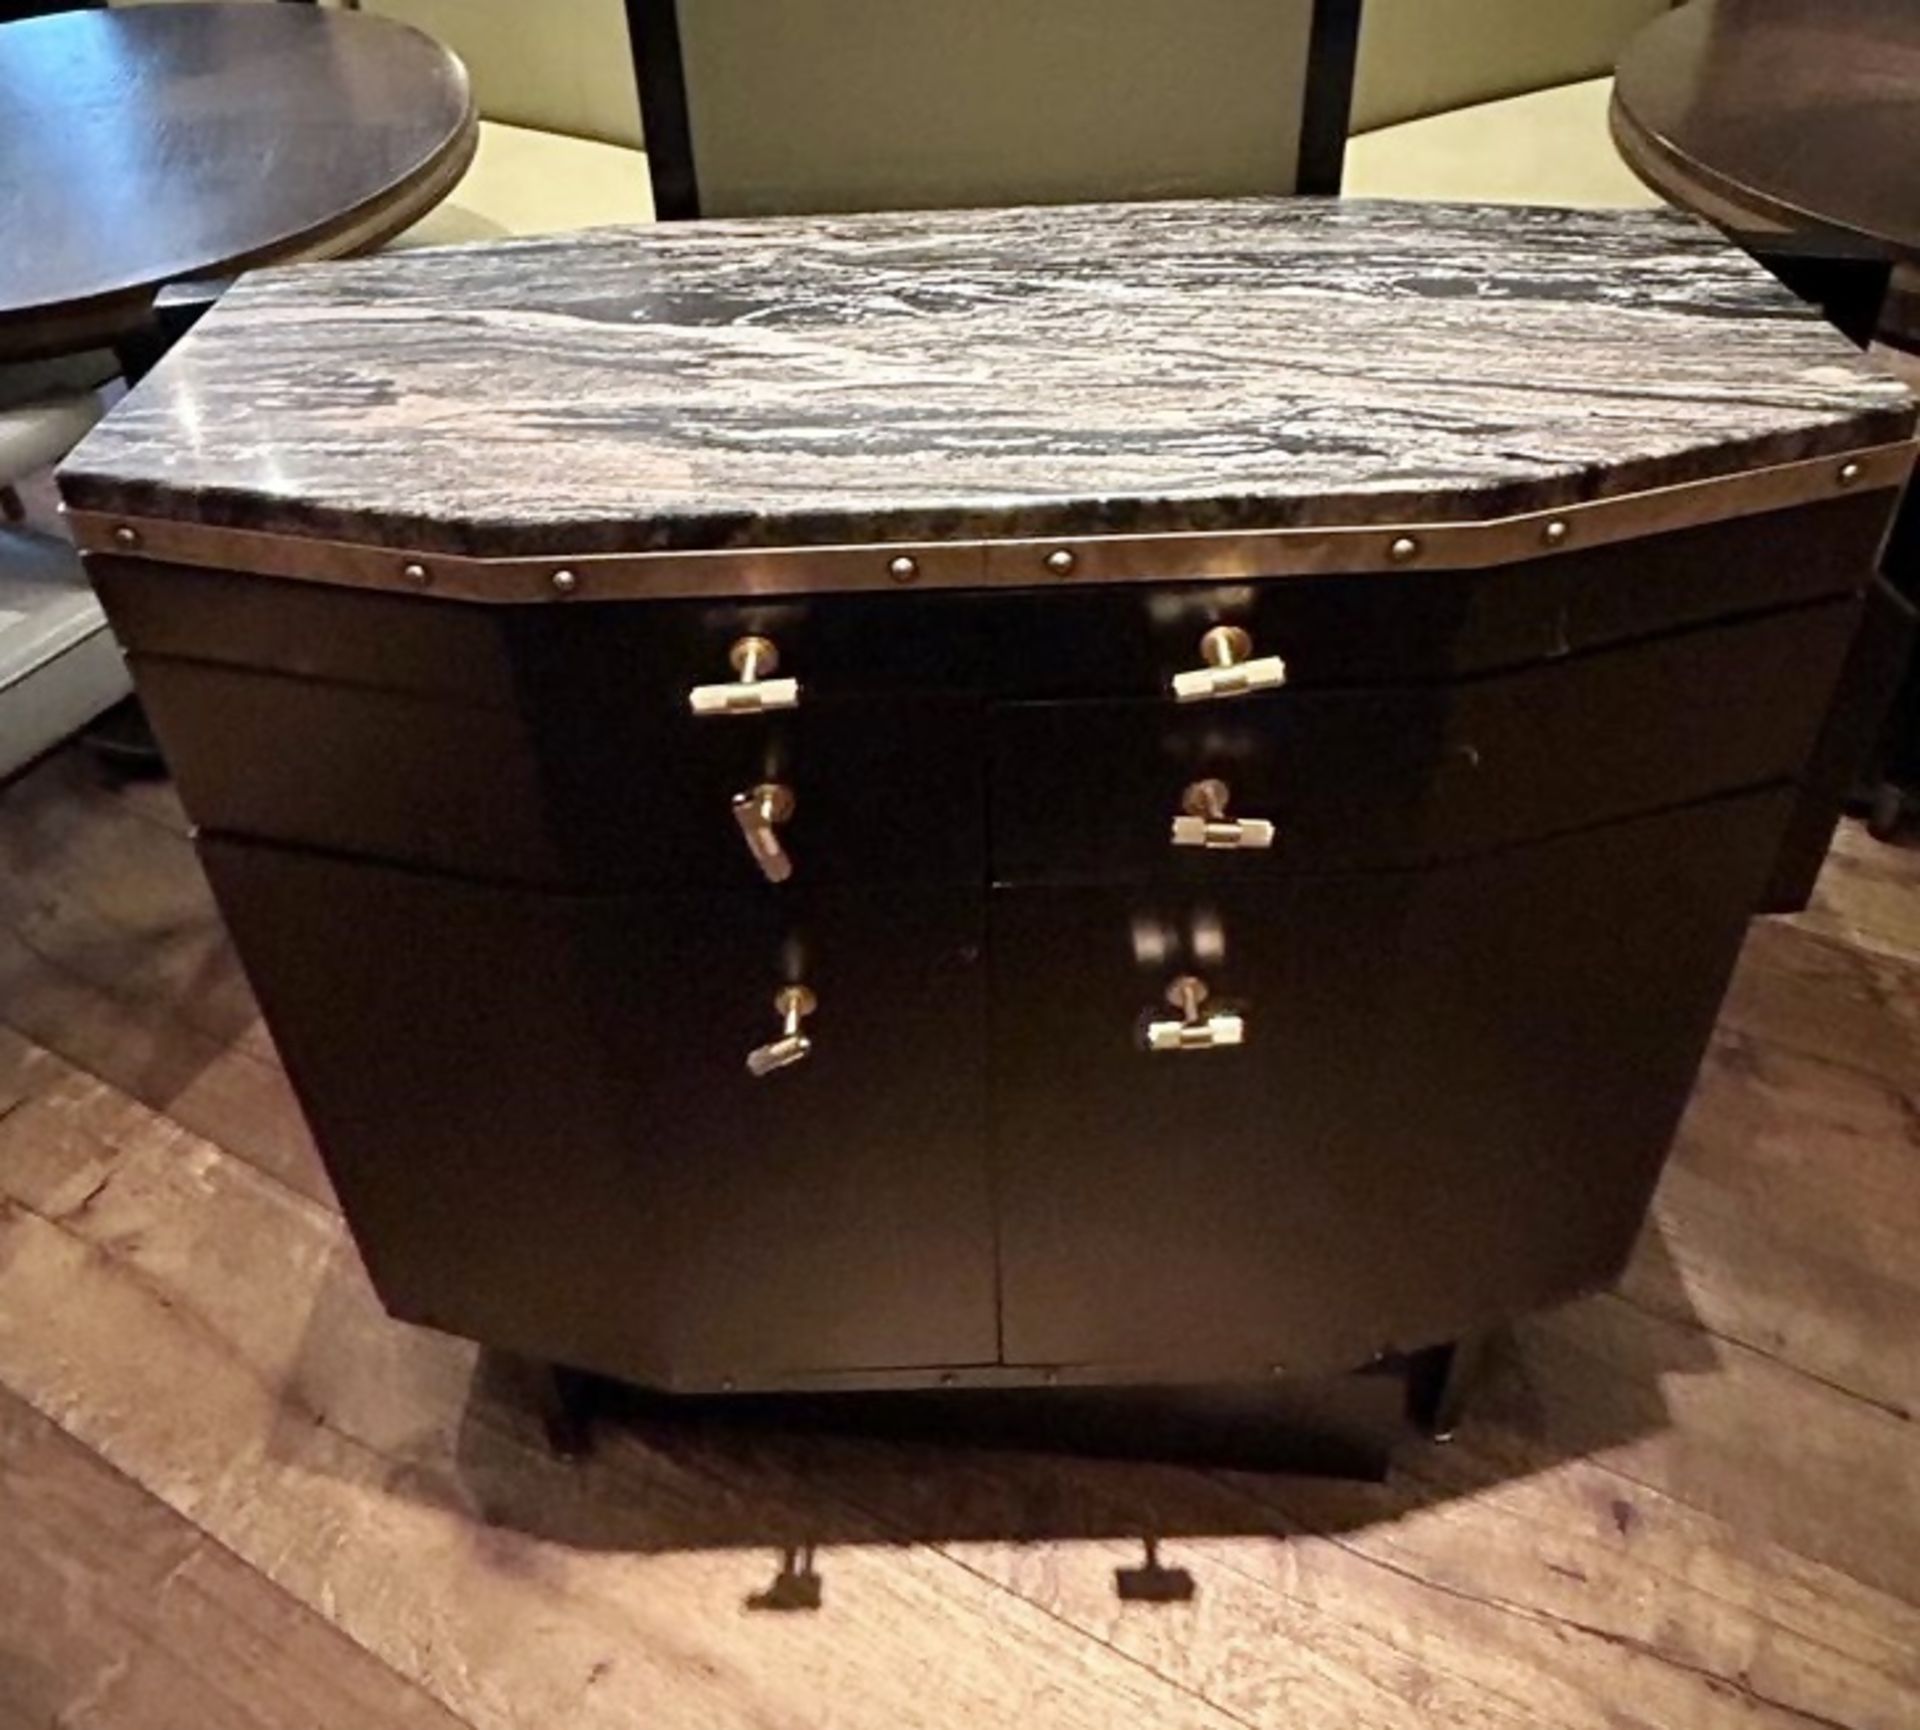 1 x Luxury Stone Topped Sideboard Dresser Finished in Black and Brass Detail - Dimensions: 94x45x90 - Image 2 of 10